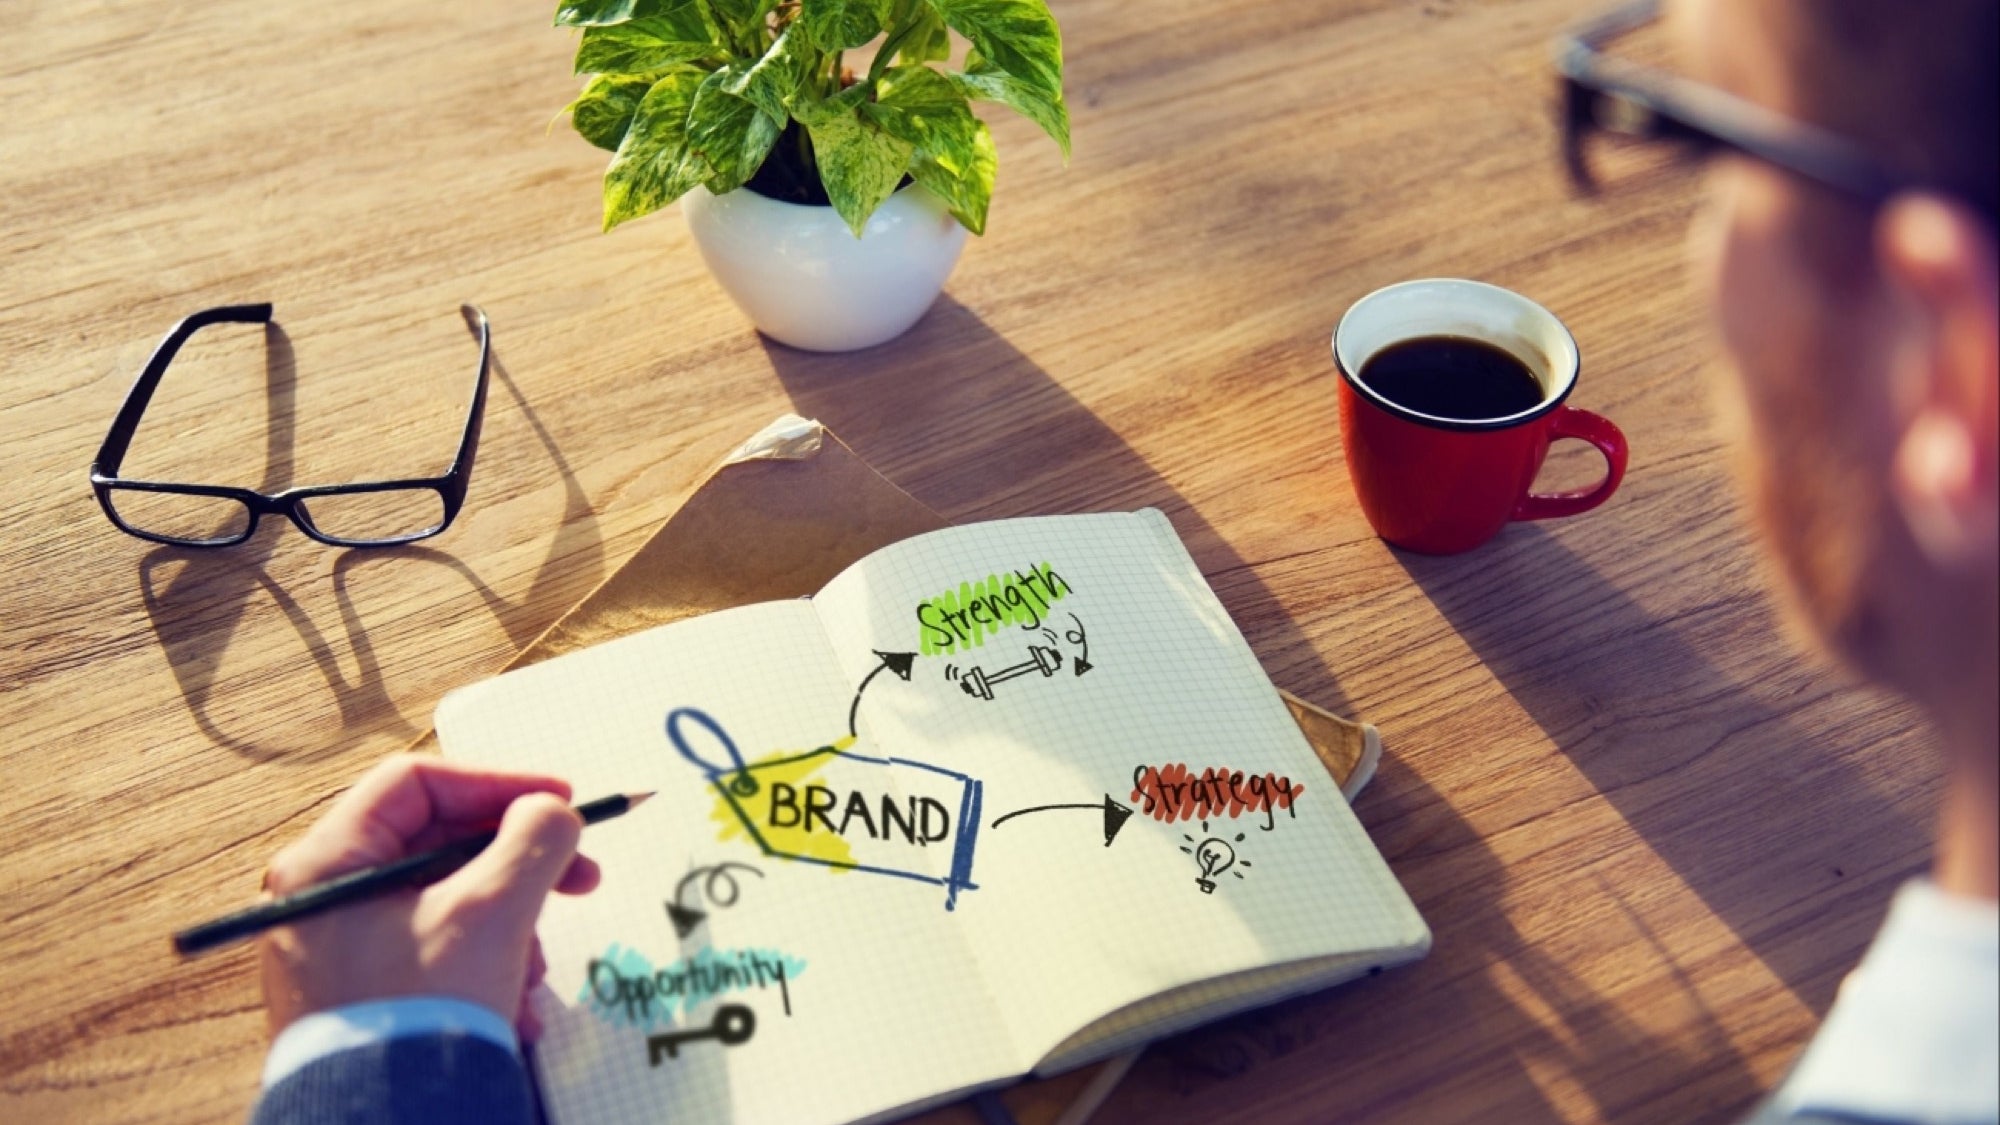 How Can You Make Your Brand Successful Online?